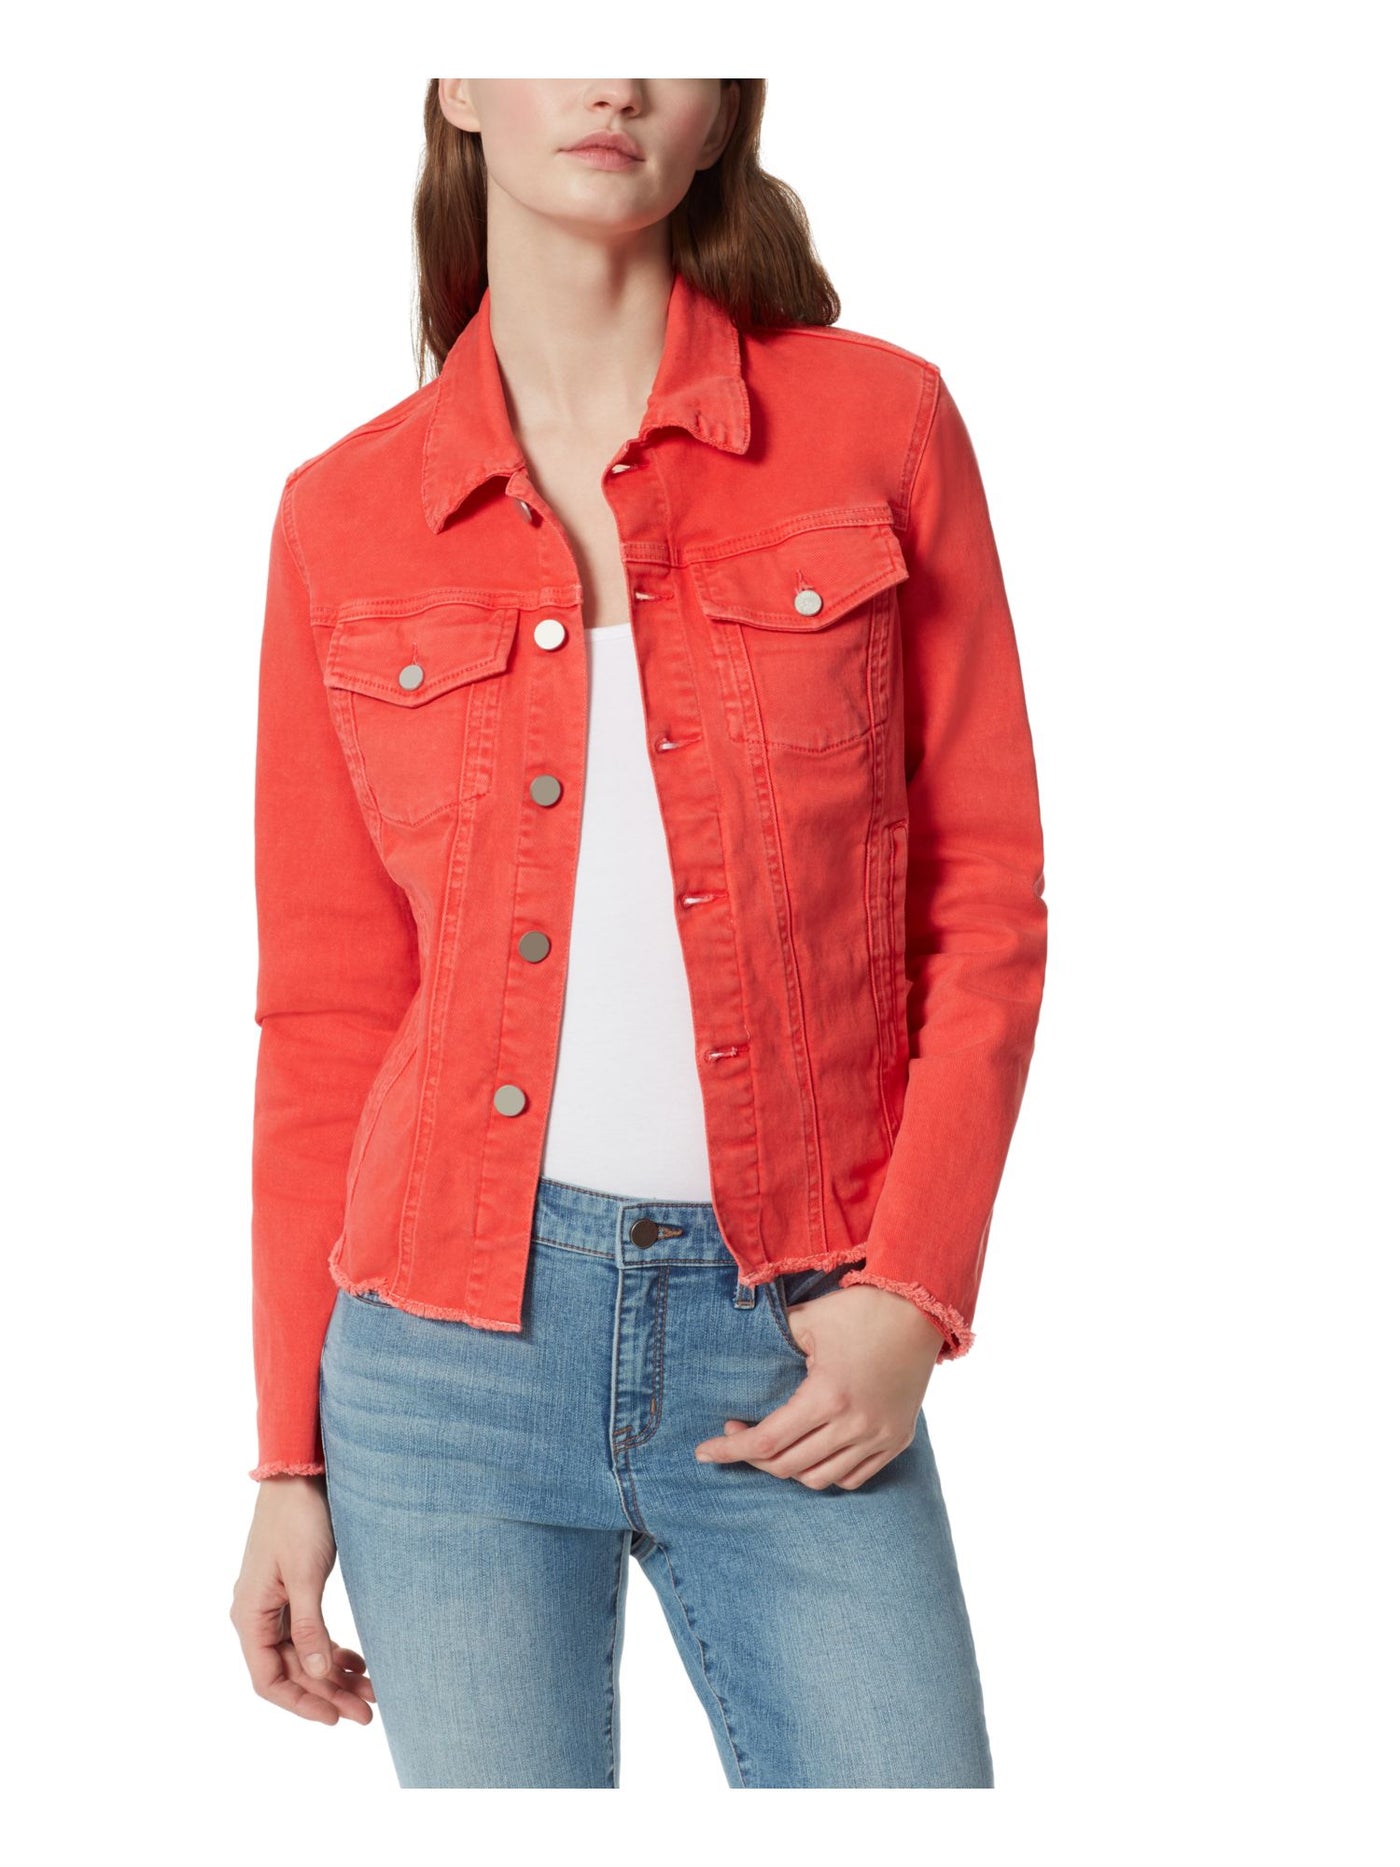 FRAYED JEANS Womens Coral Pocketed Raw Hem Button Down Jacket XL